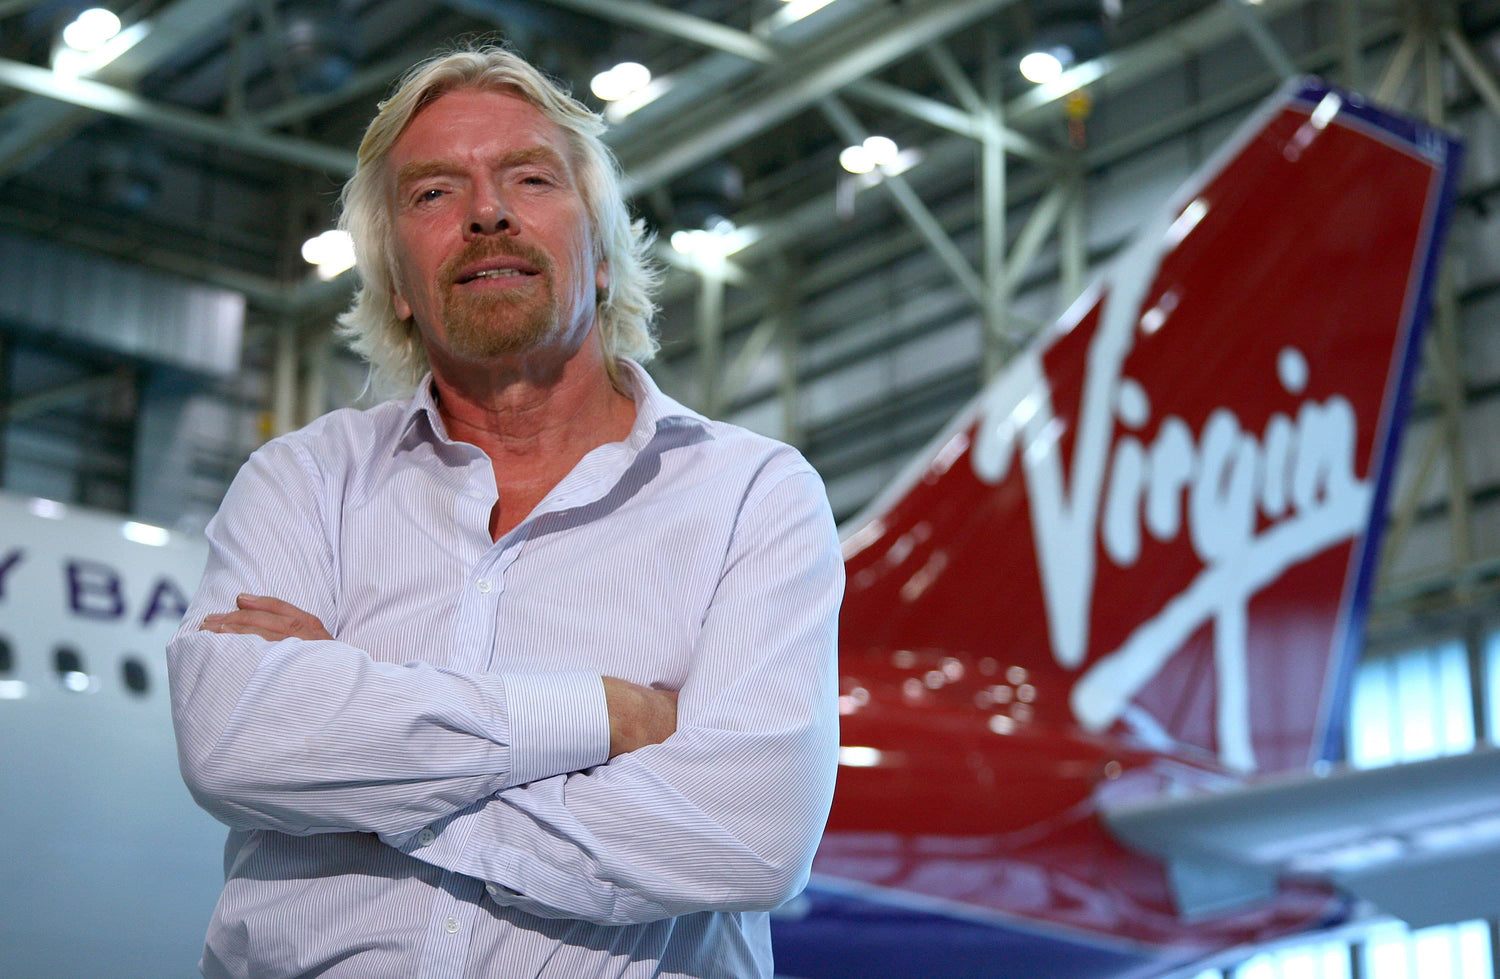 Richard Branson posing in front of a Virgin airplane.